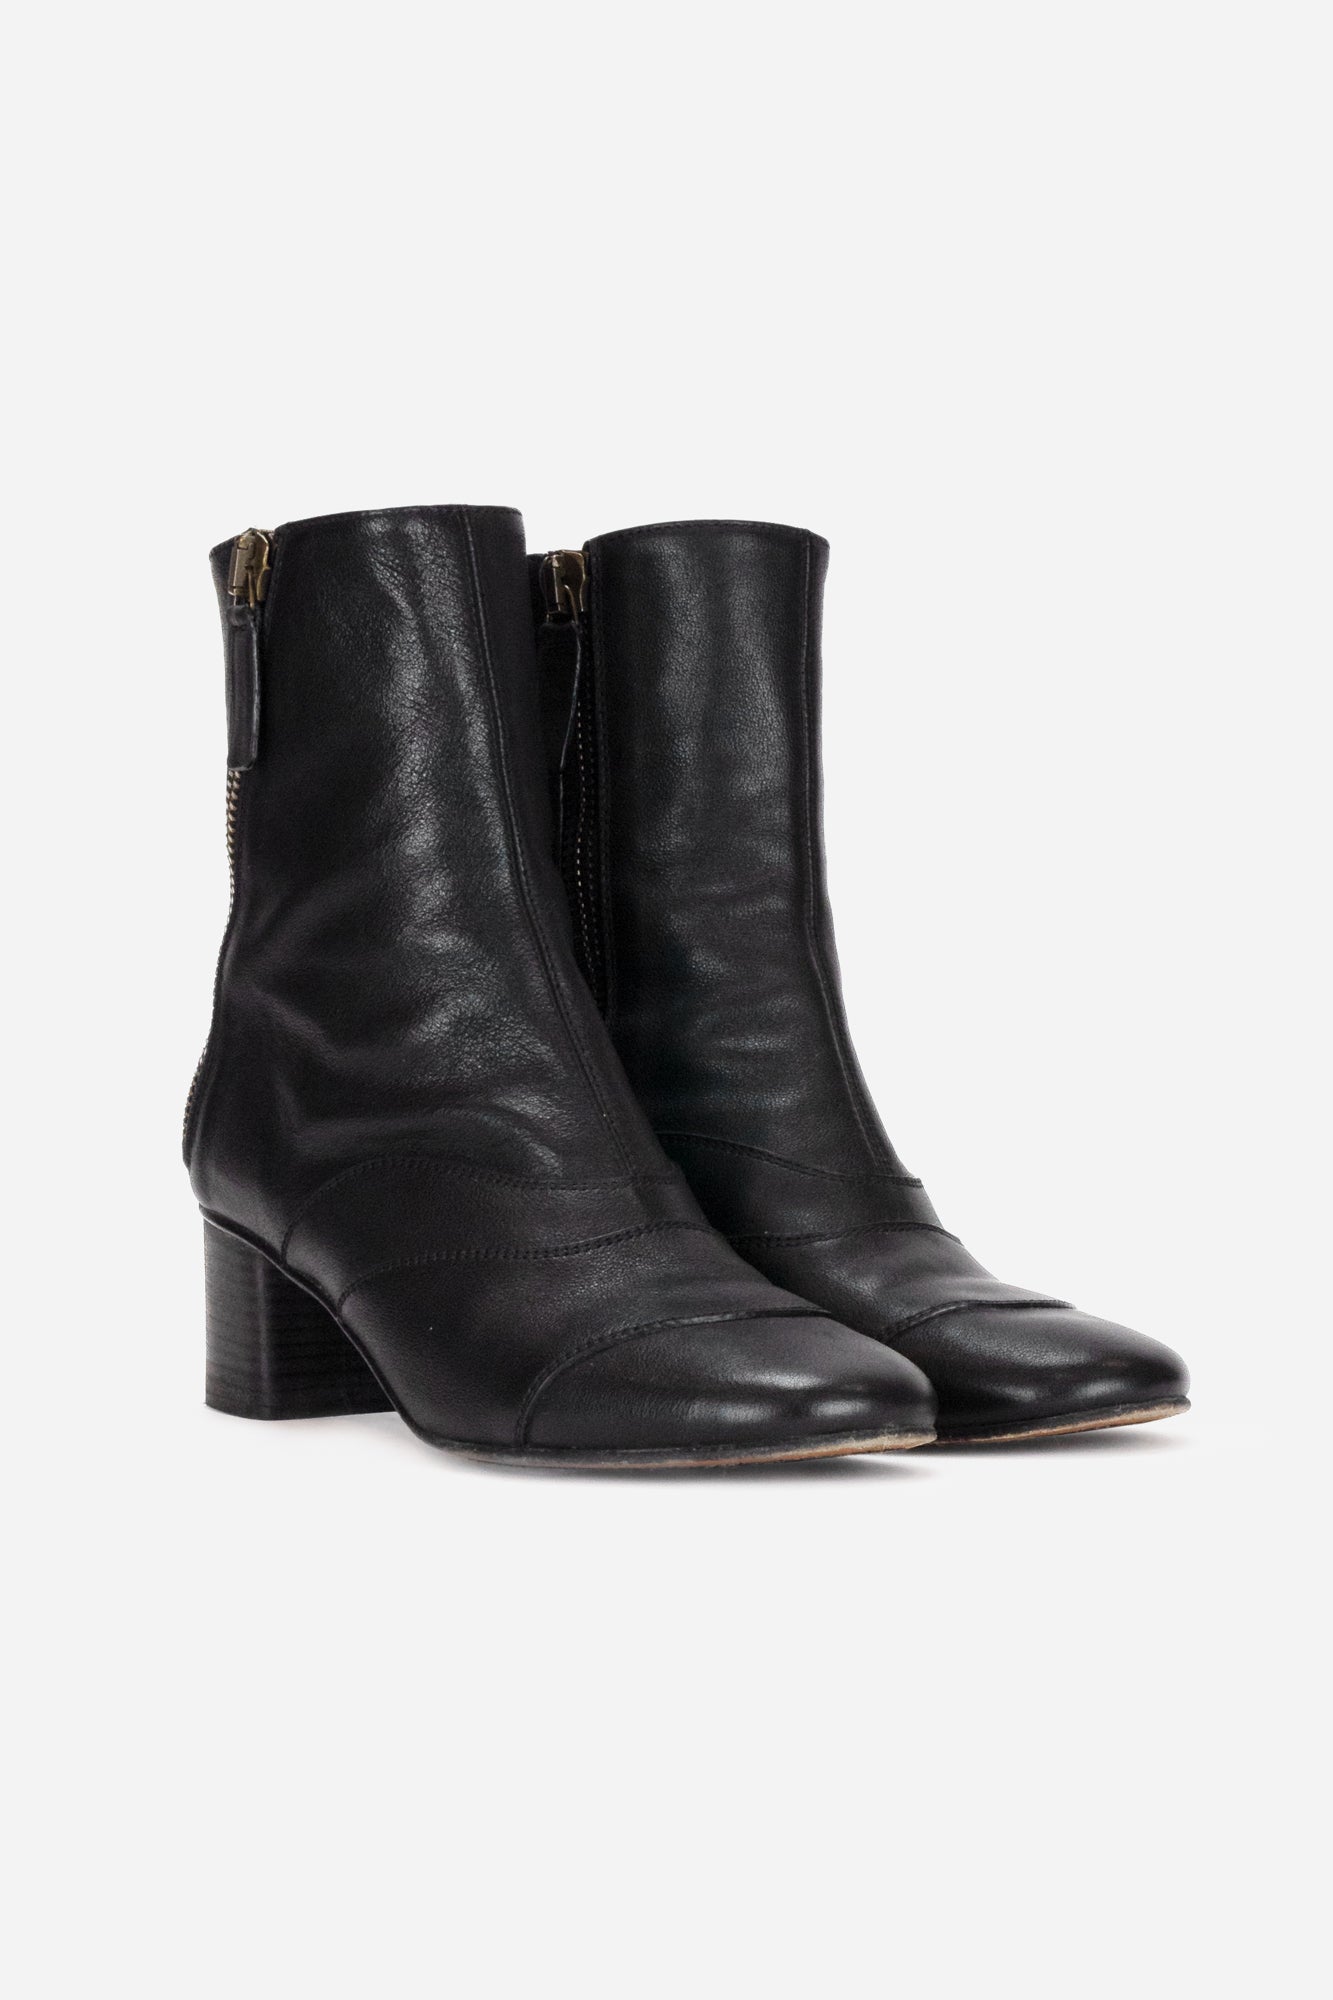 Black Leather Boots with Zipper Detail